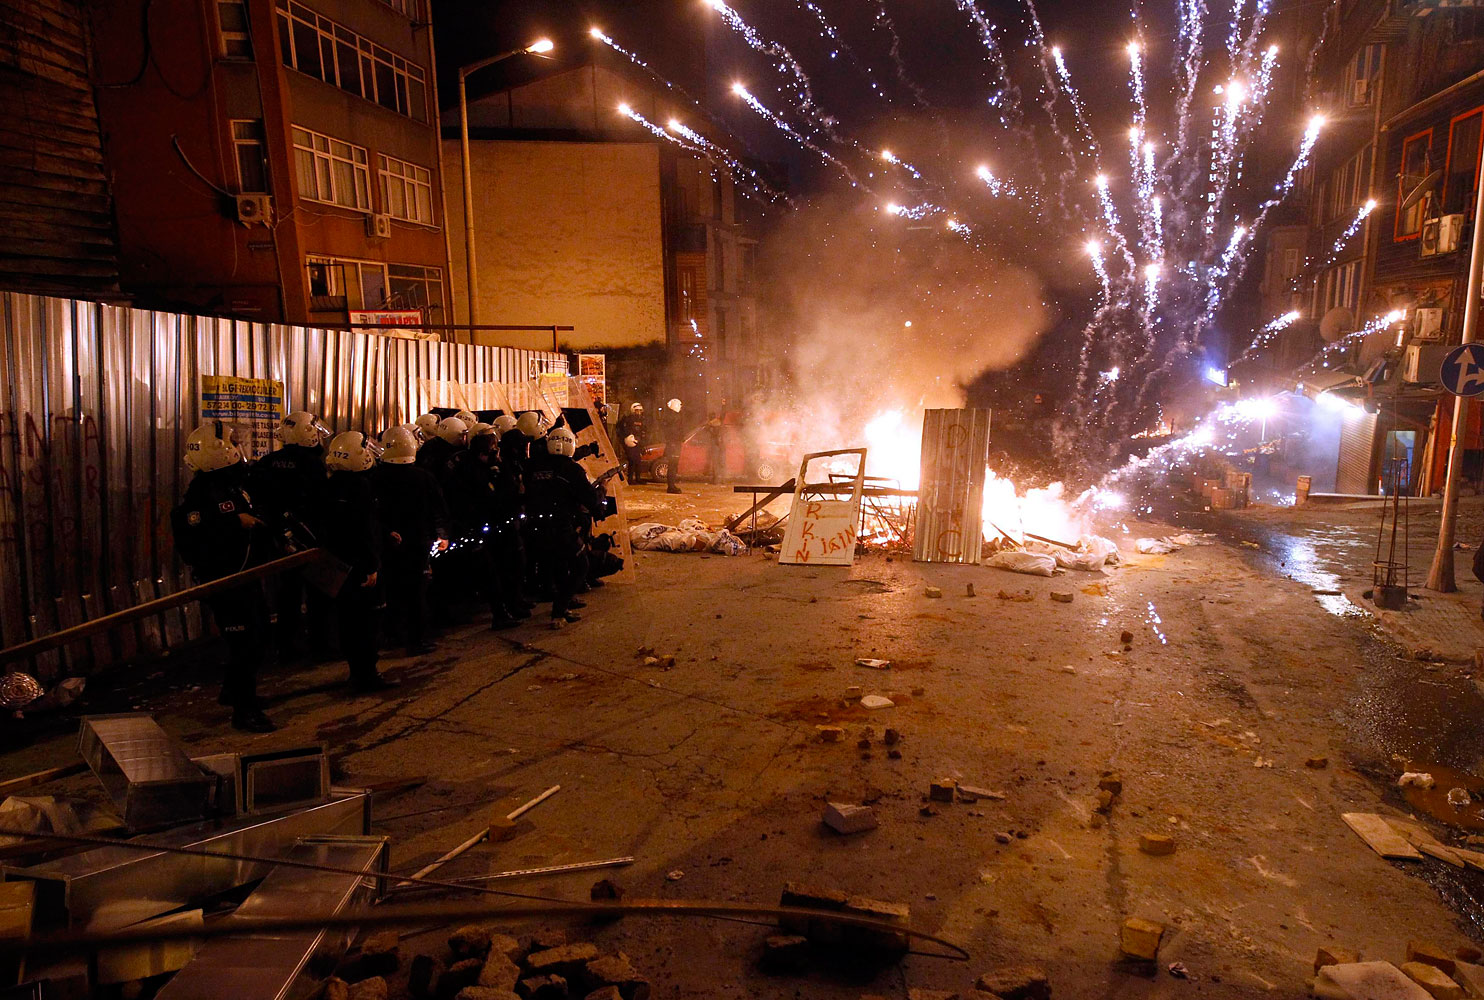 Riot policemen shield themselves as fireworks thrown by anti-government protesters explode near central Taksim square in Istanbul March 12, 2014.